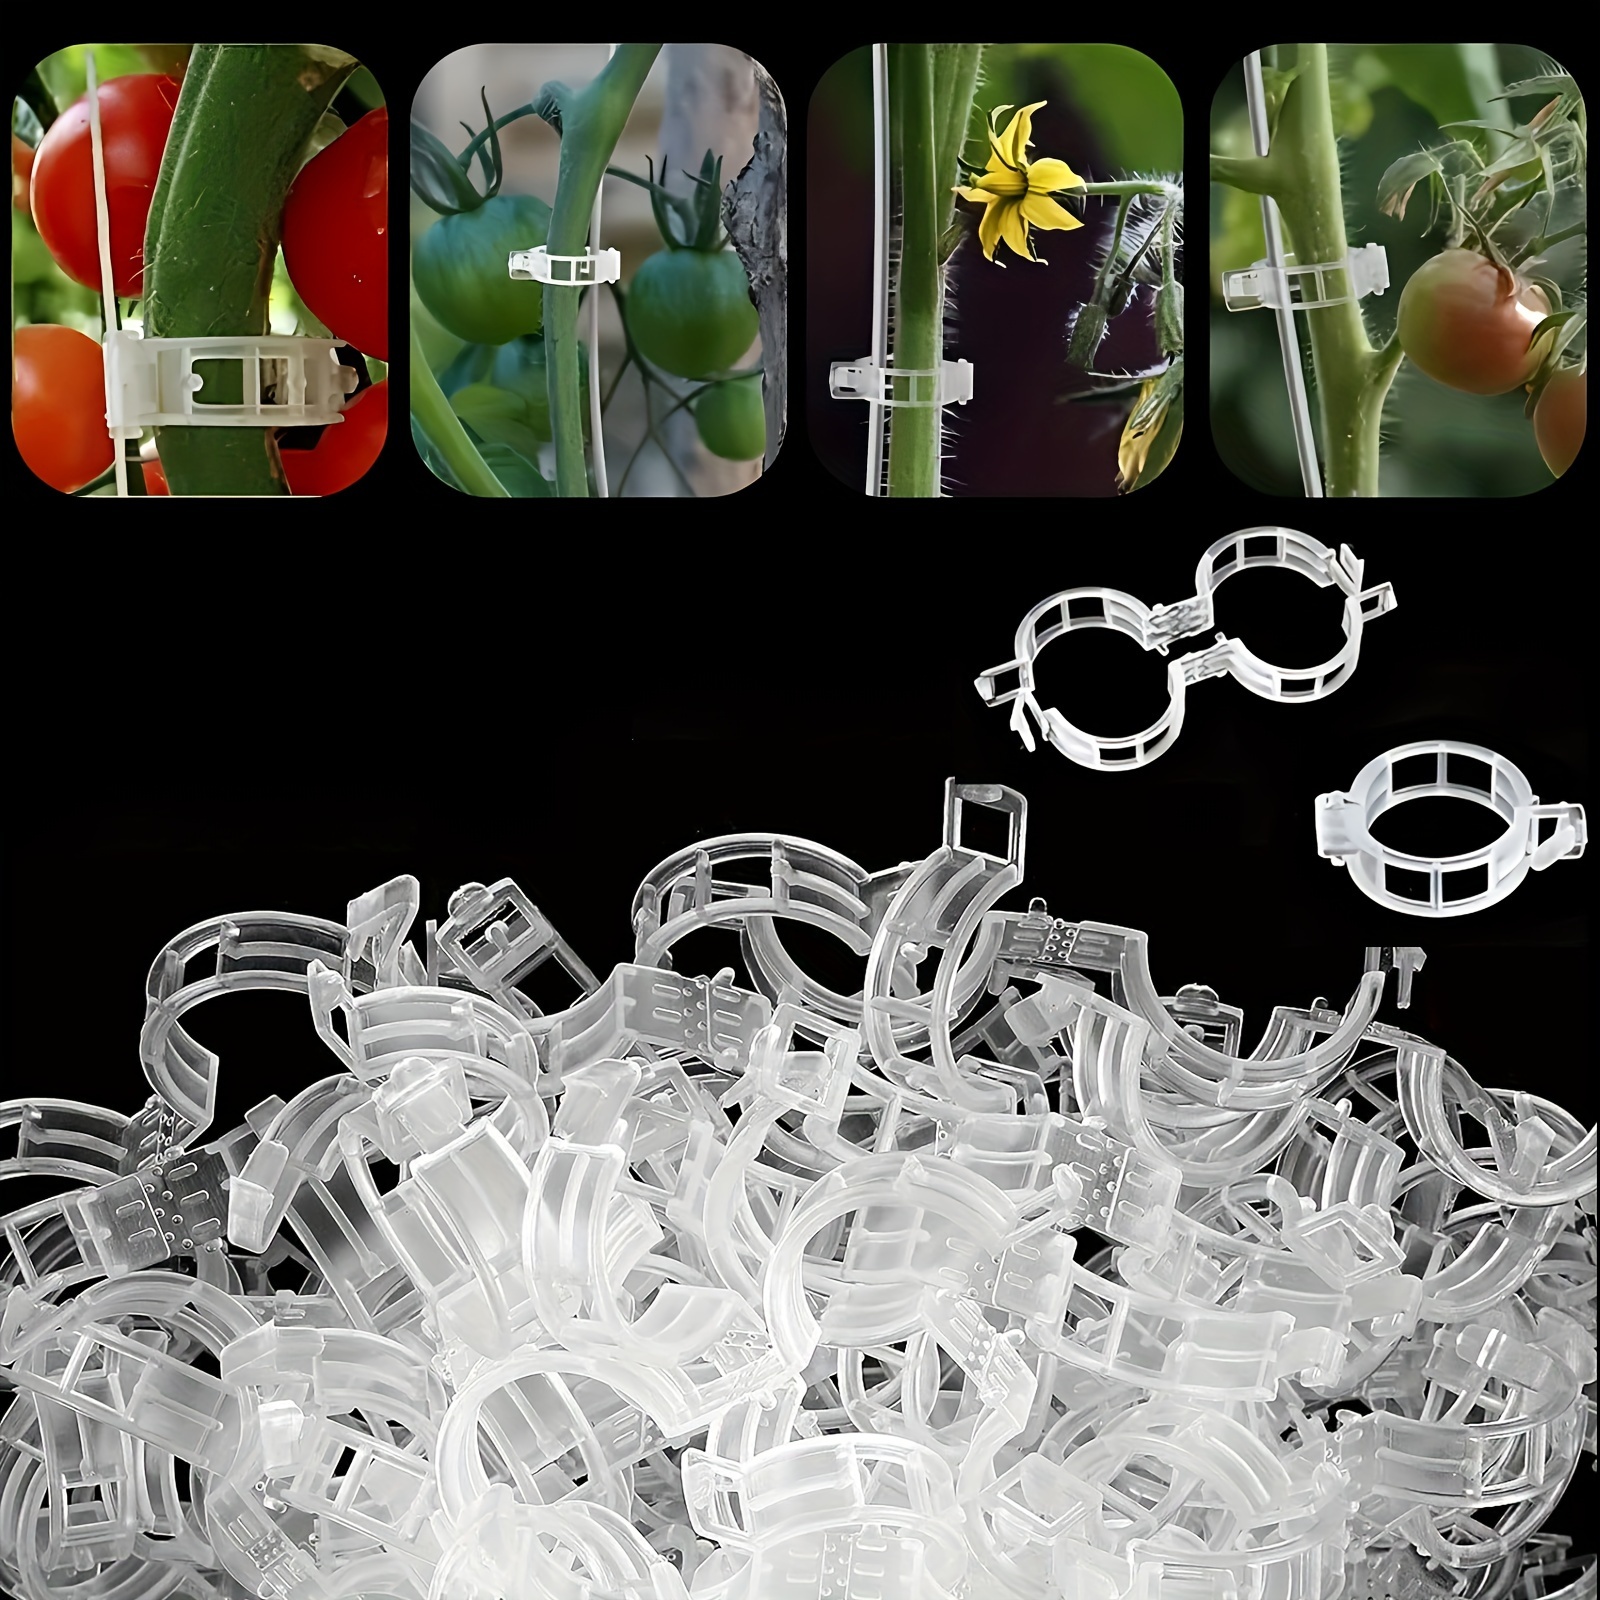 

200 Pcs Plastic Trellis Plant Support Clips For Support, Grape And Tomato Vine, Vegetables Plants, Garden Clips To Grow Upright Makes Plants Healthier